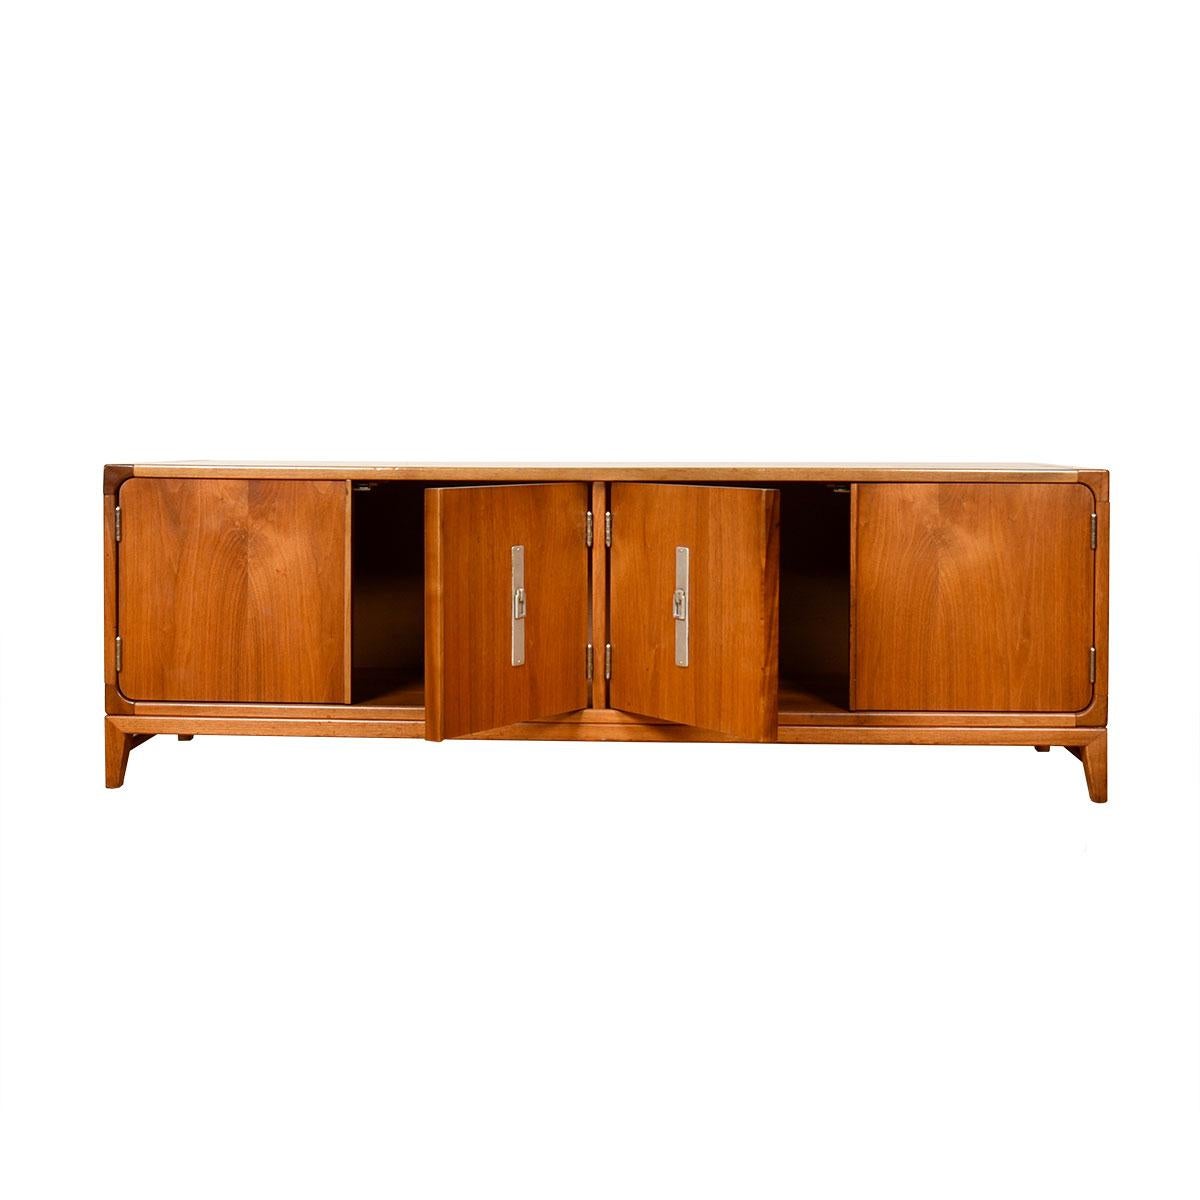 Mid-Century Modern Low Sideboard in Walnut by John Keal for Brown-Saltman

Additional Information:
Material: Walnut
Style: Mid-Century Modern
Featured at Kensington:
From respected the respected mid-century decorator line by John Keal for